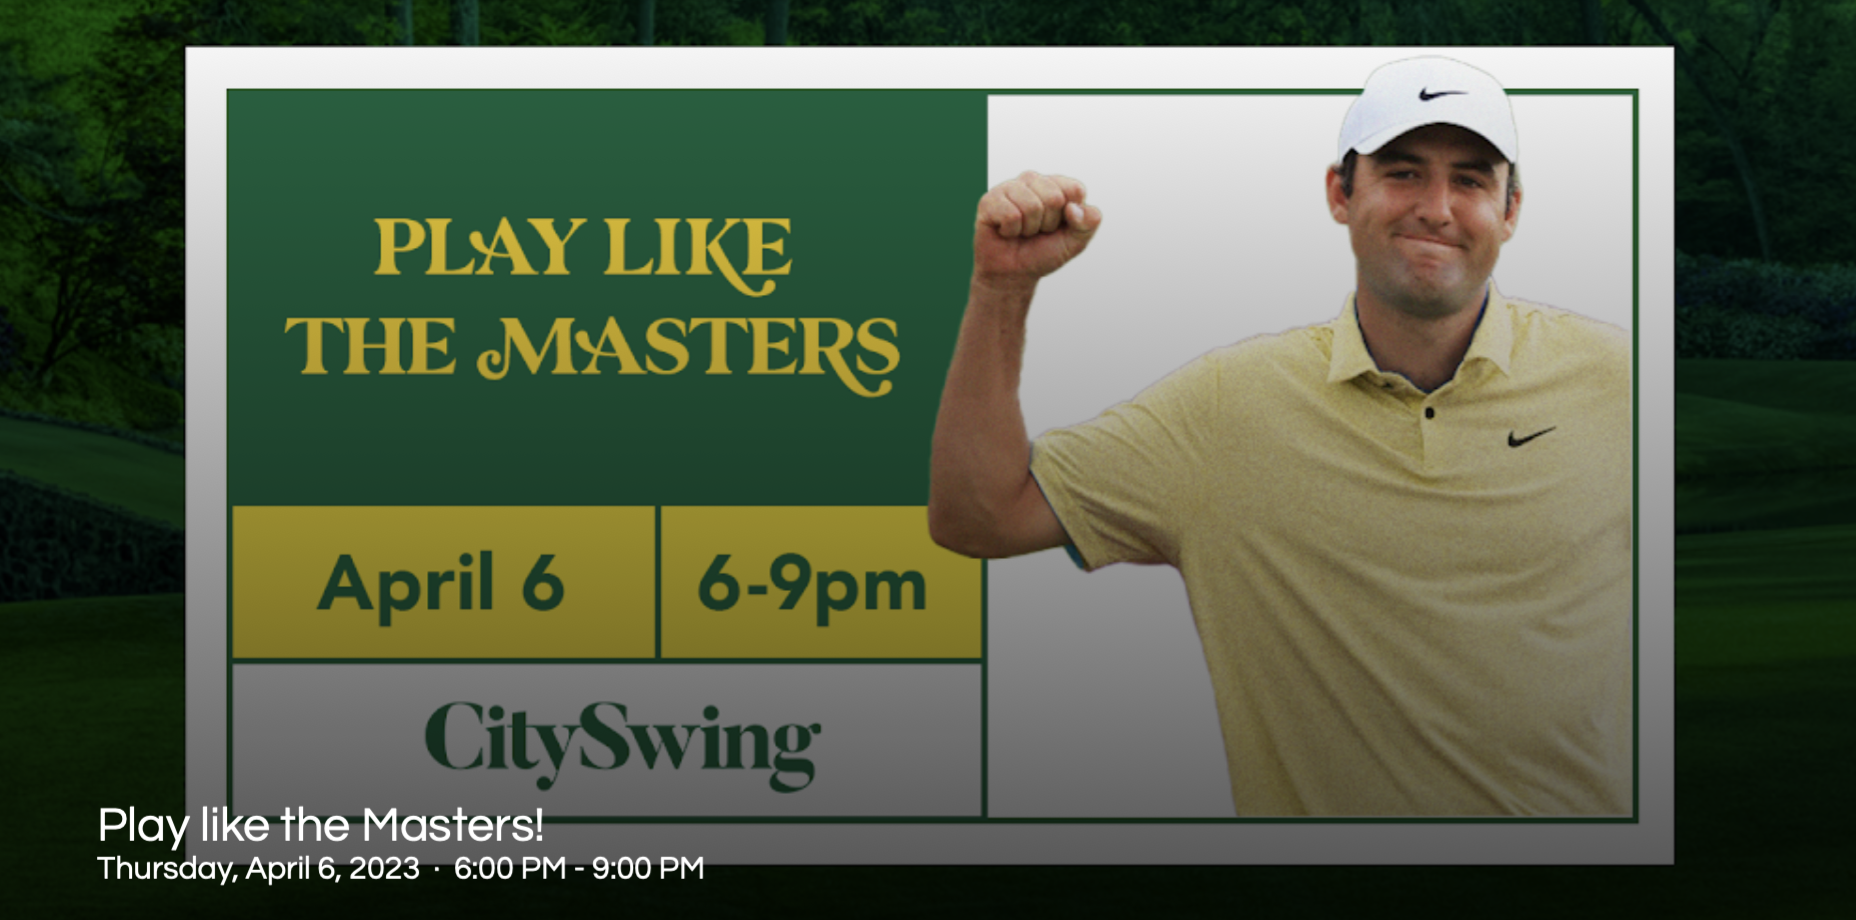 Play like the Masters at CitySwing